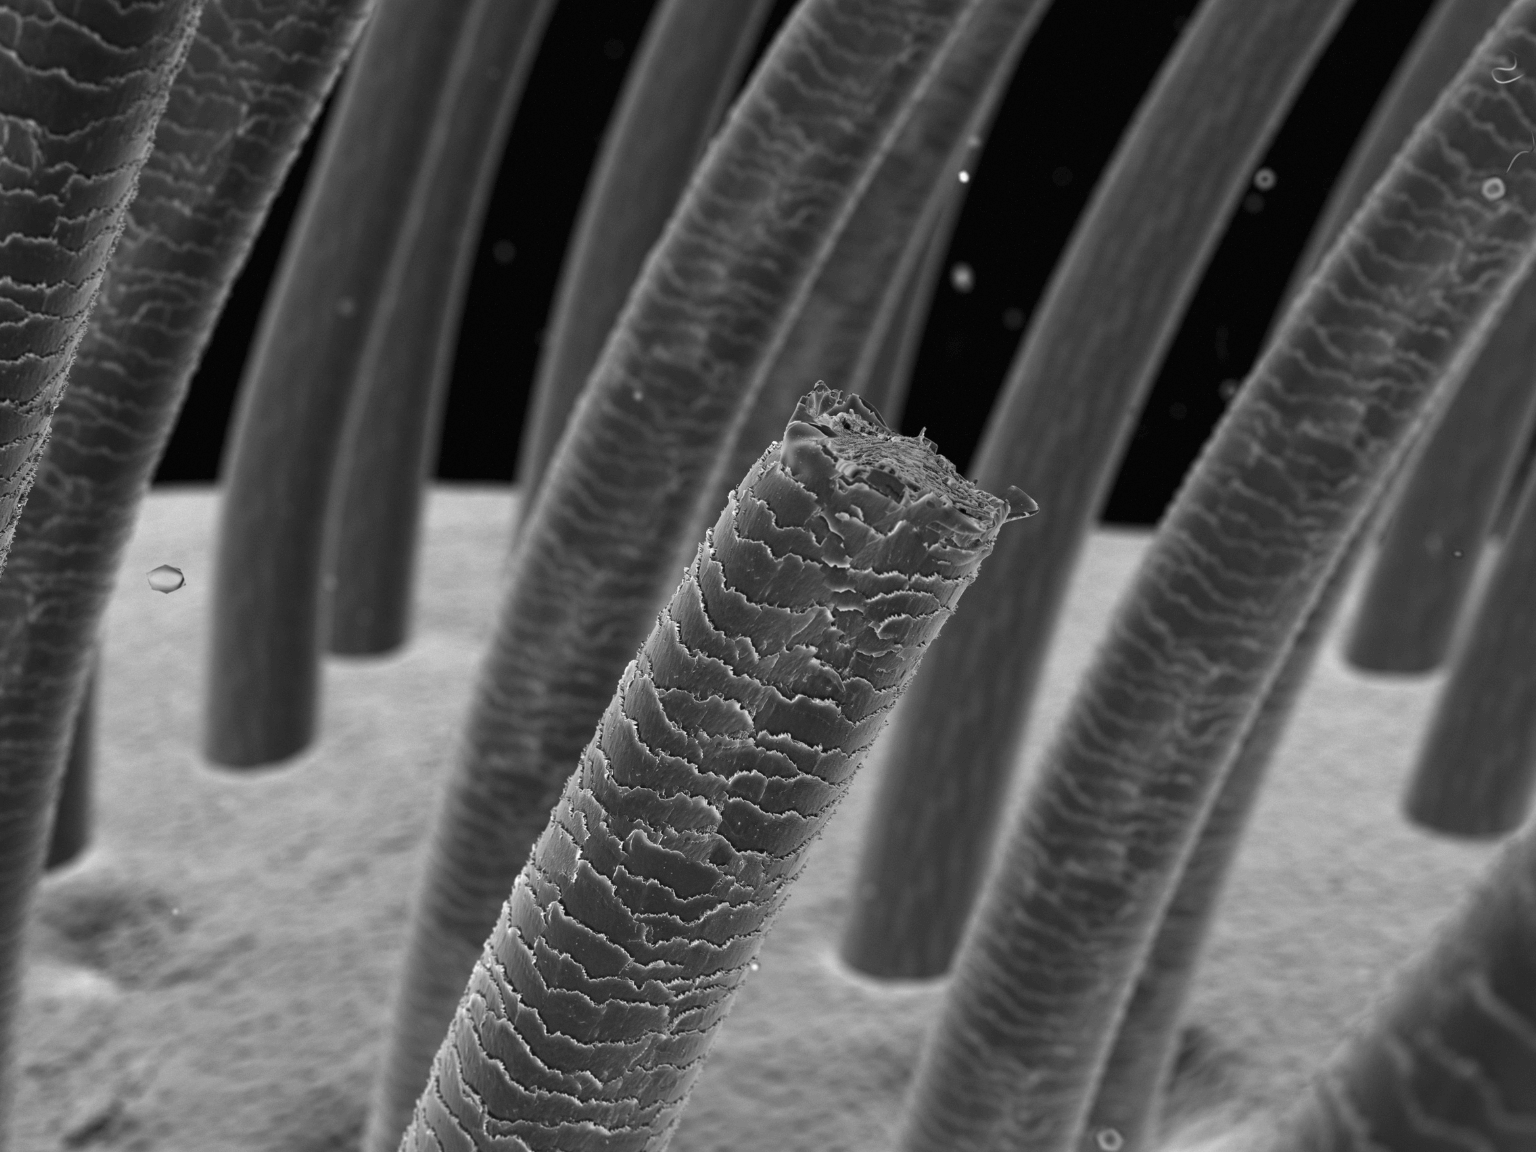 a close-up microscope image of hair strands; one hair is broken